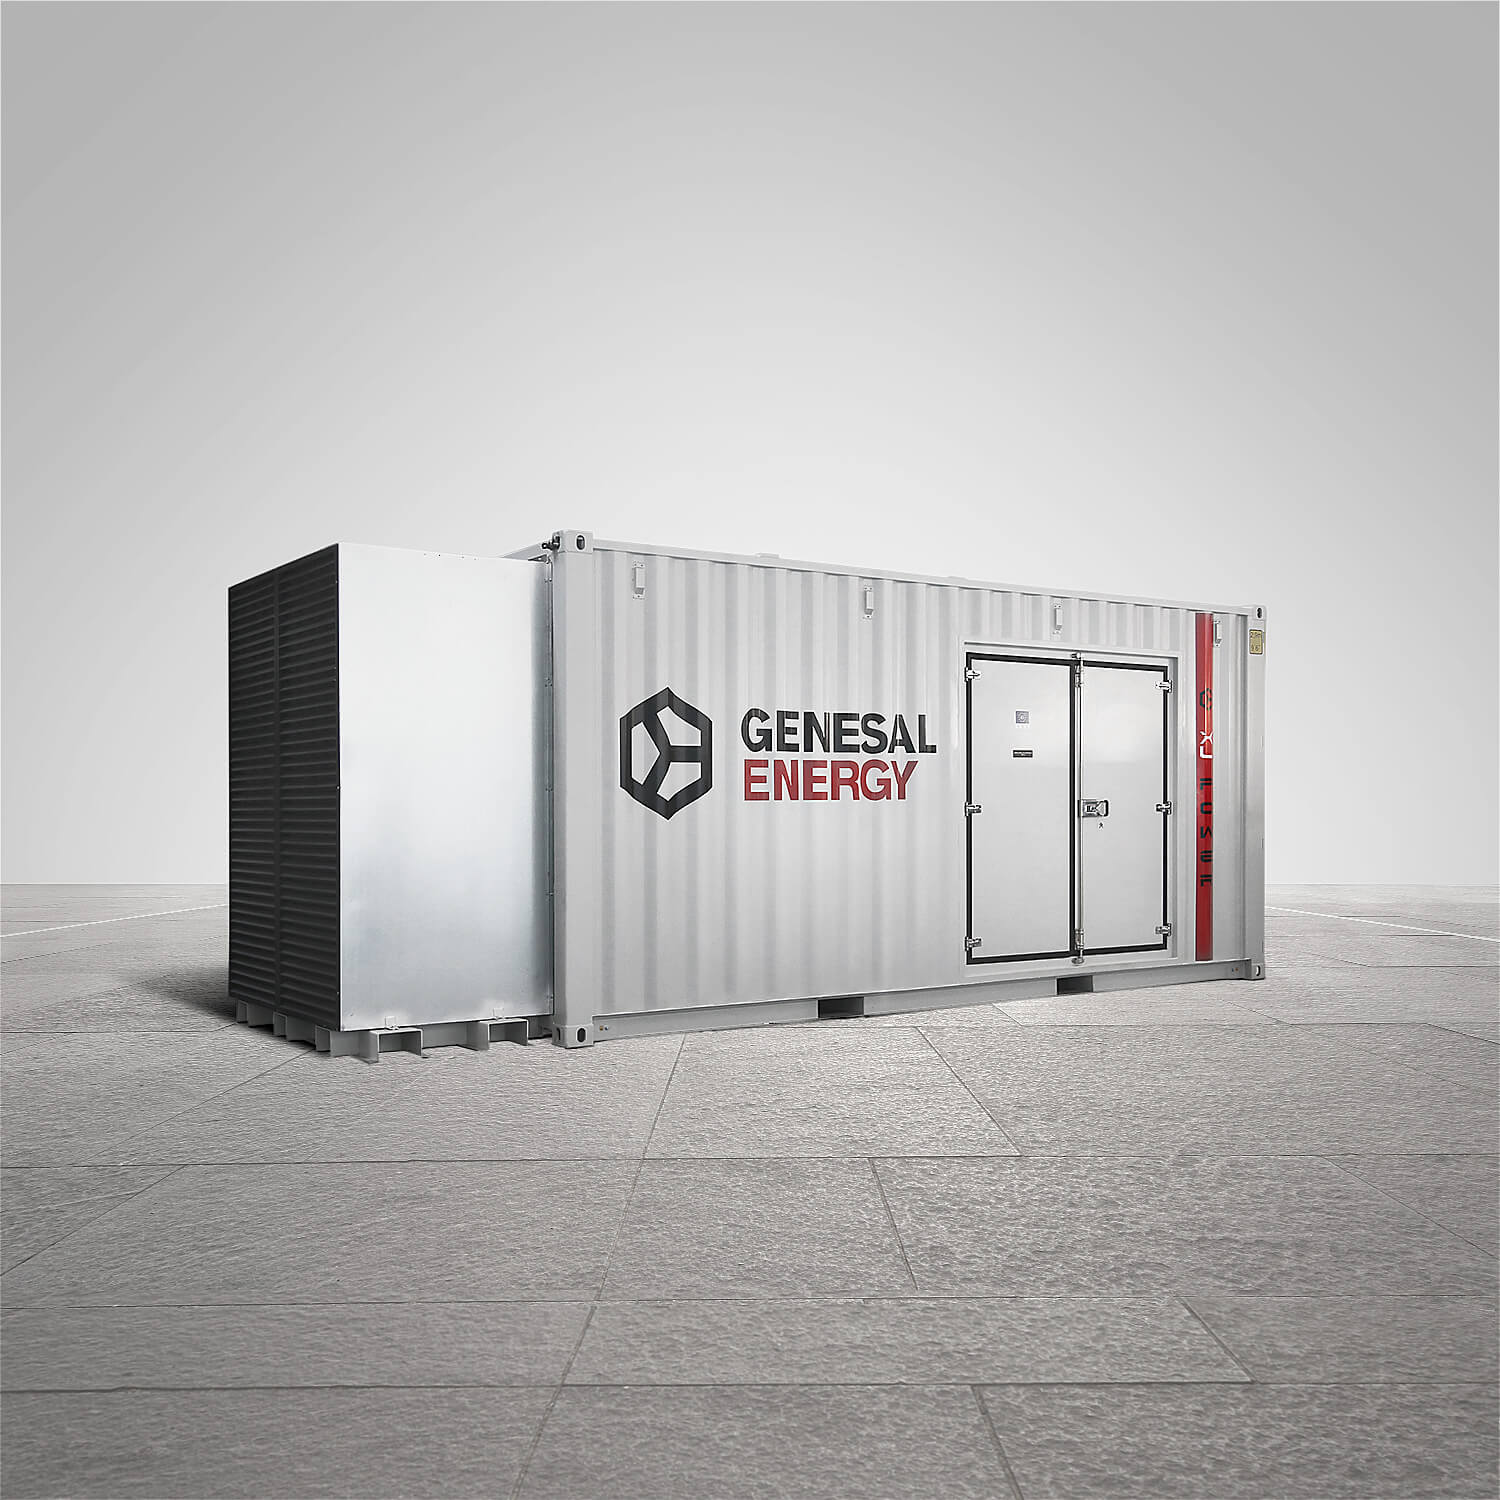 We designed the gensets for two biomass power plants: the Viseu and Fundão power plants, in Portugal